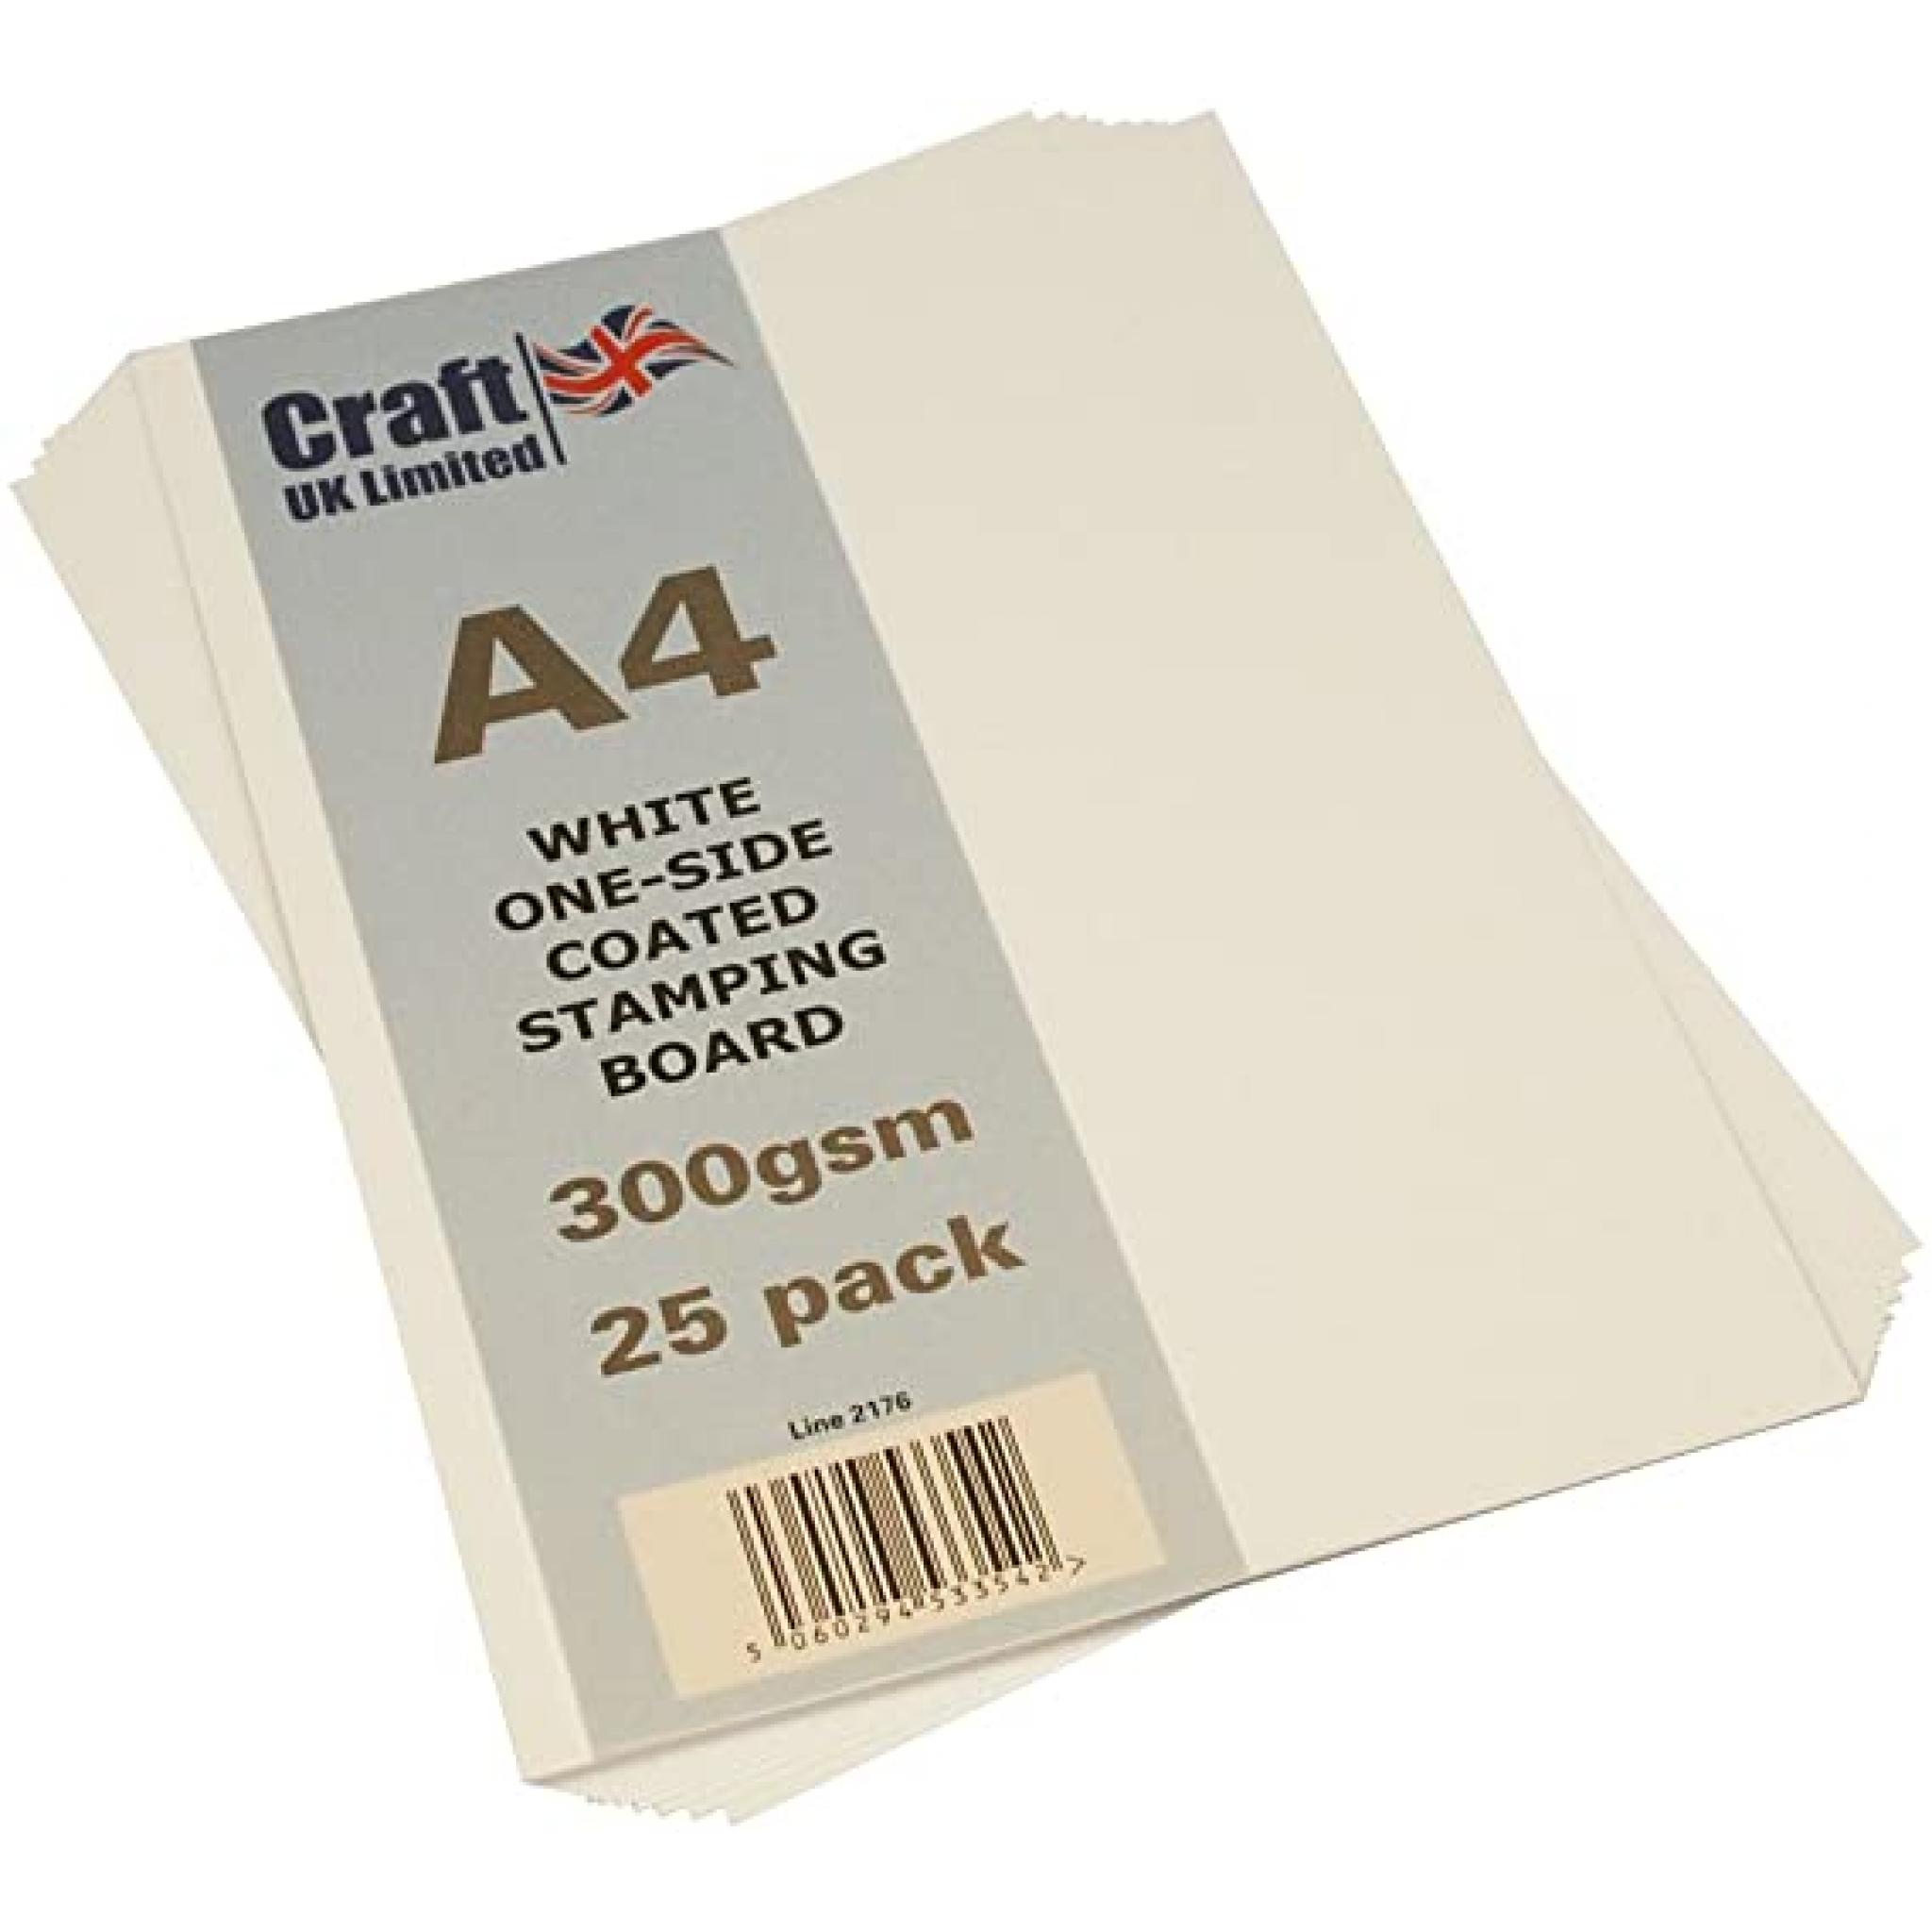 Craft UK A4 White one sided Coated Stamping Board 300gsm x 25 sheets